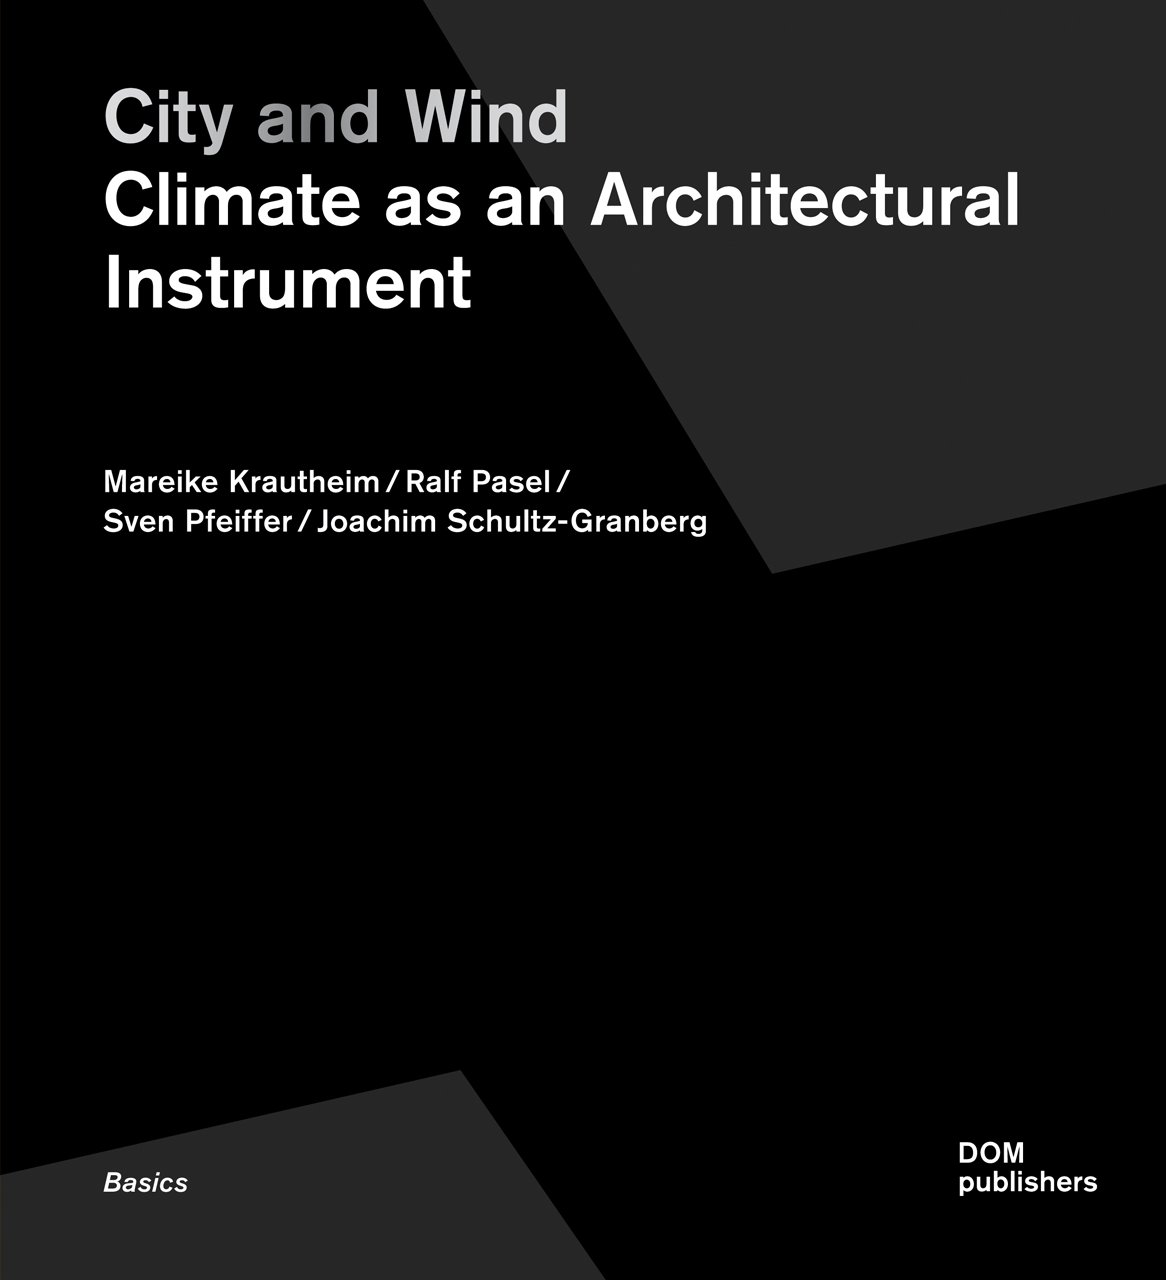 City and Wind: Climate As an Architectural Instrument